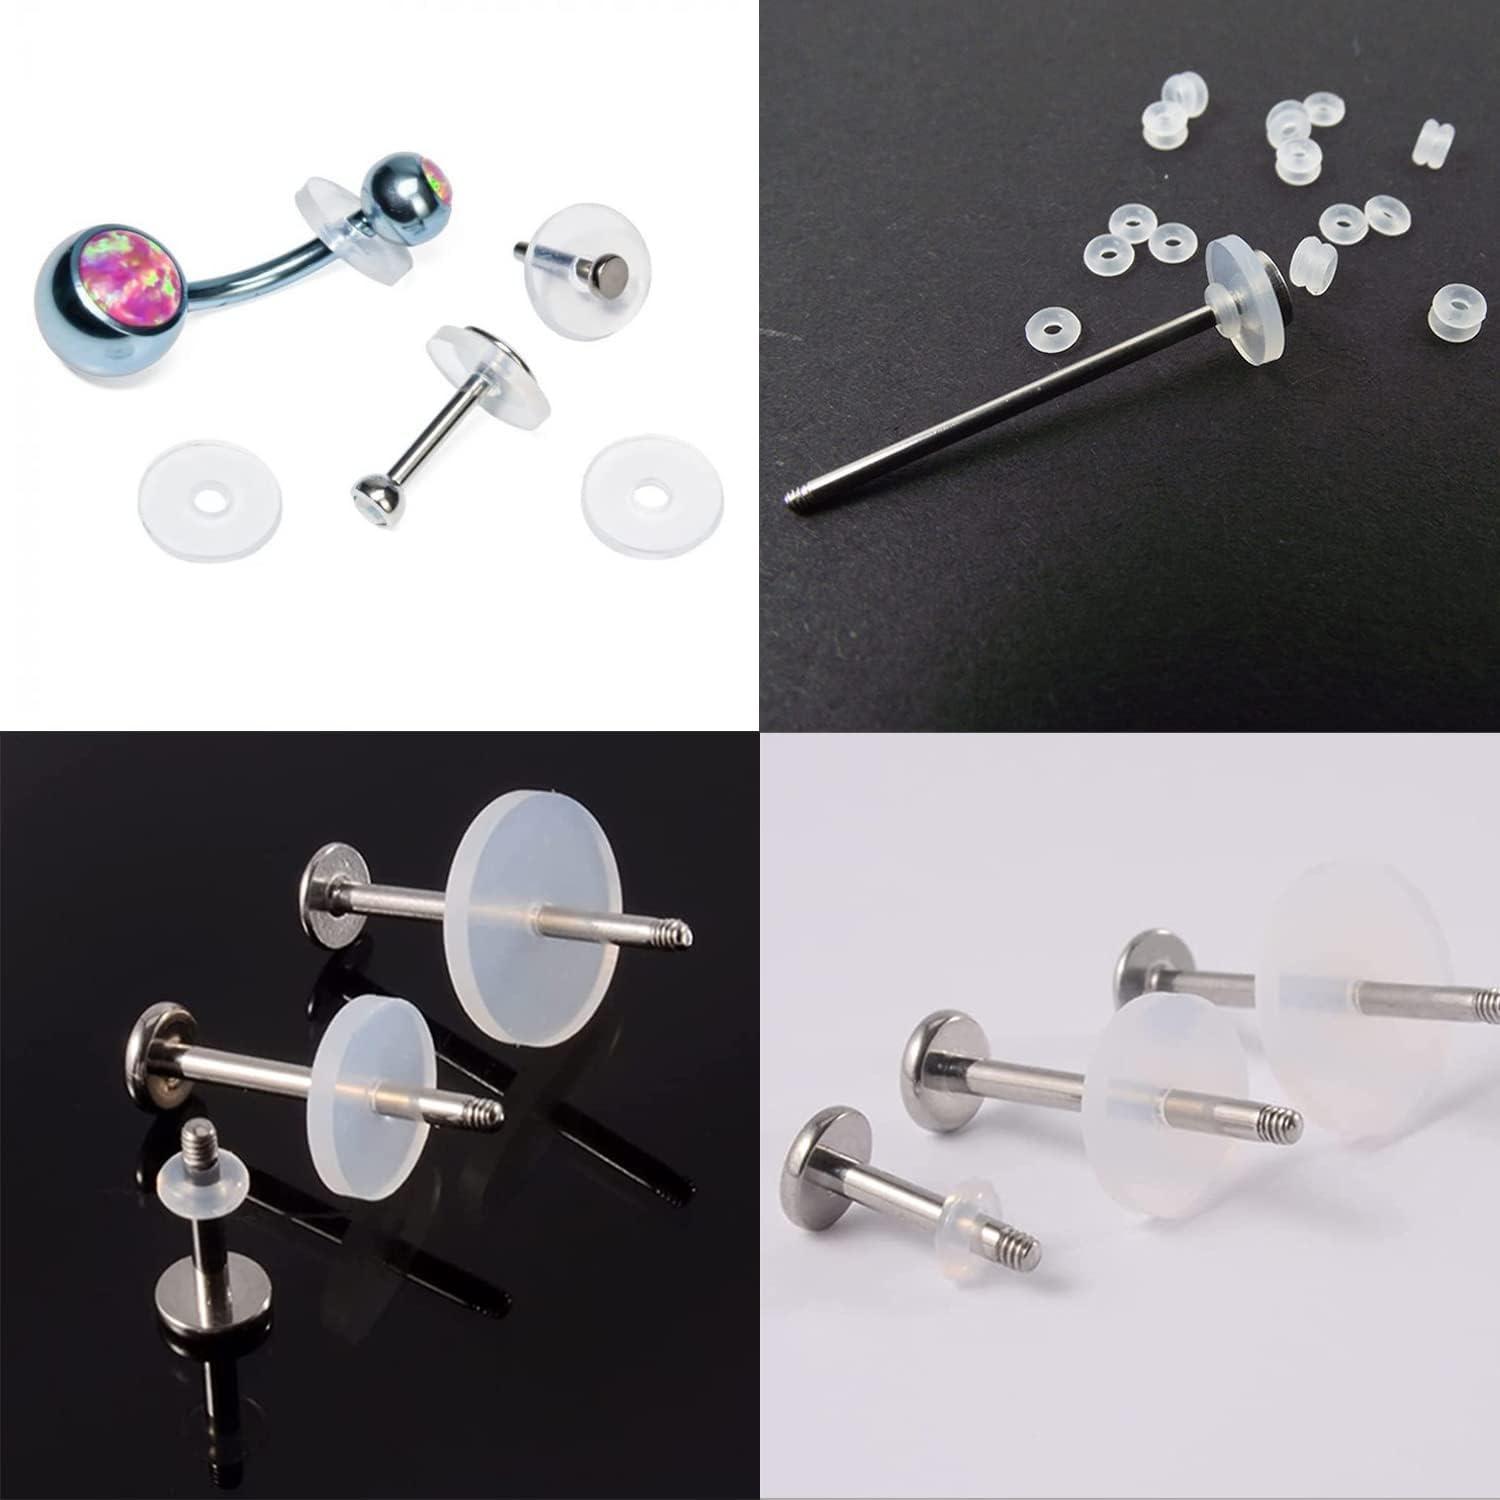 Silicone Healing Discs Piercings